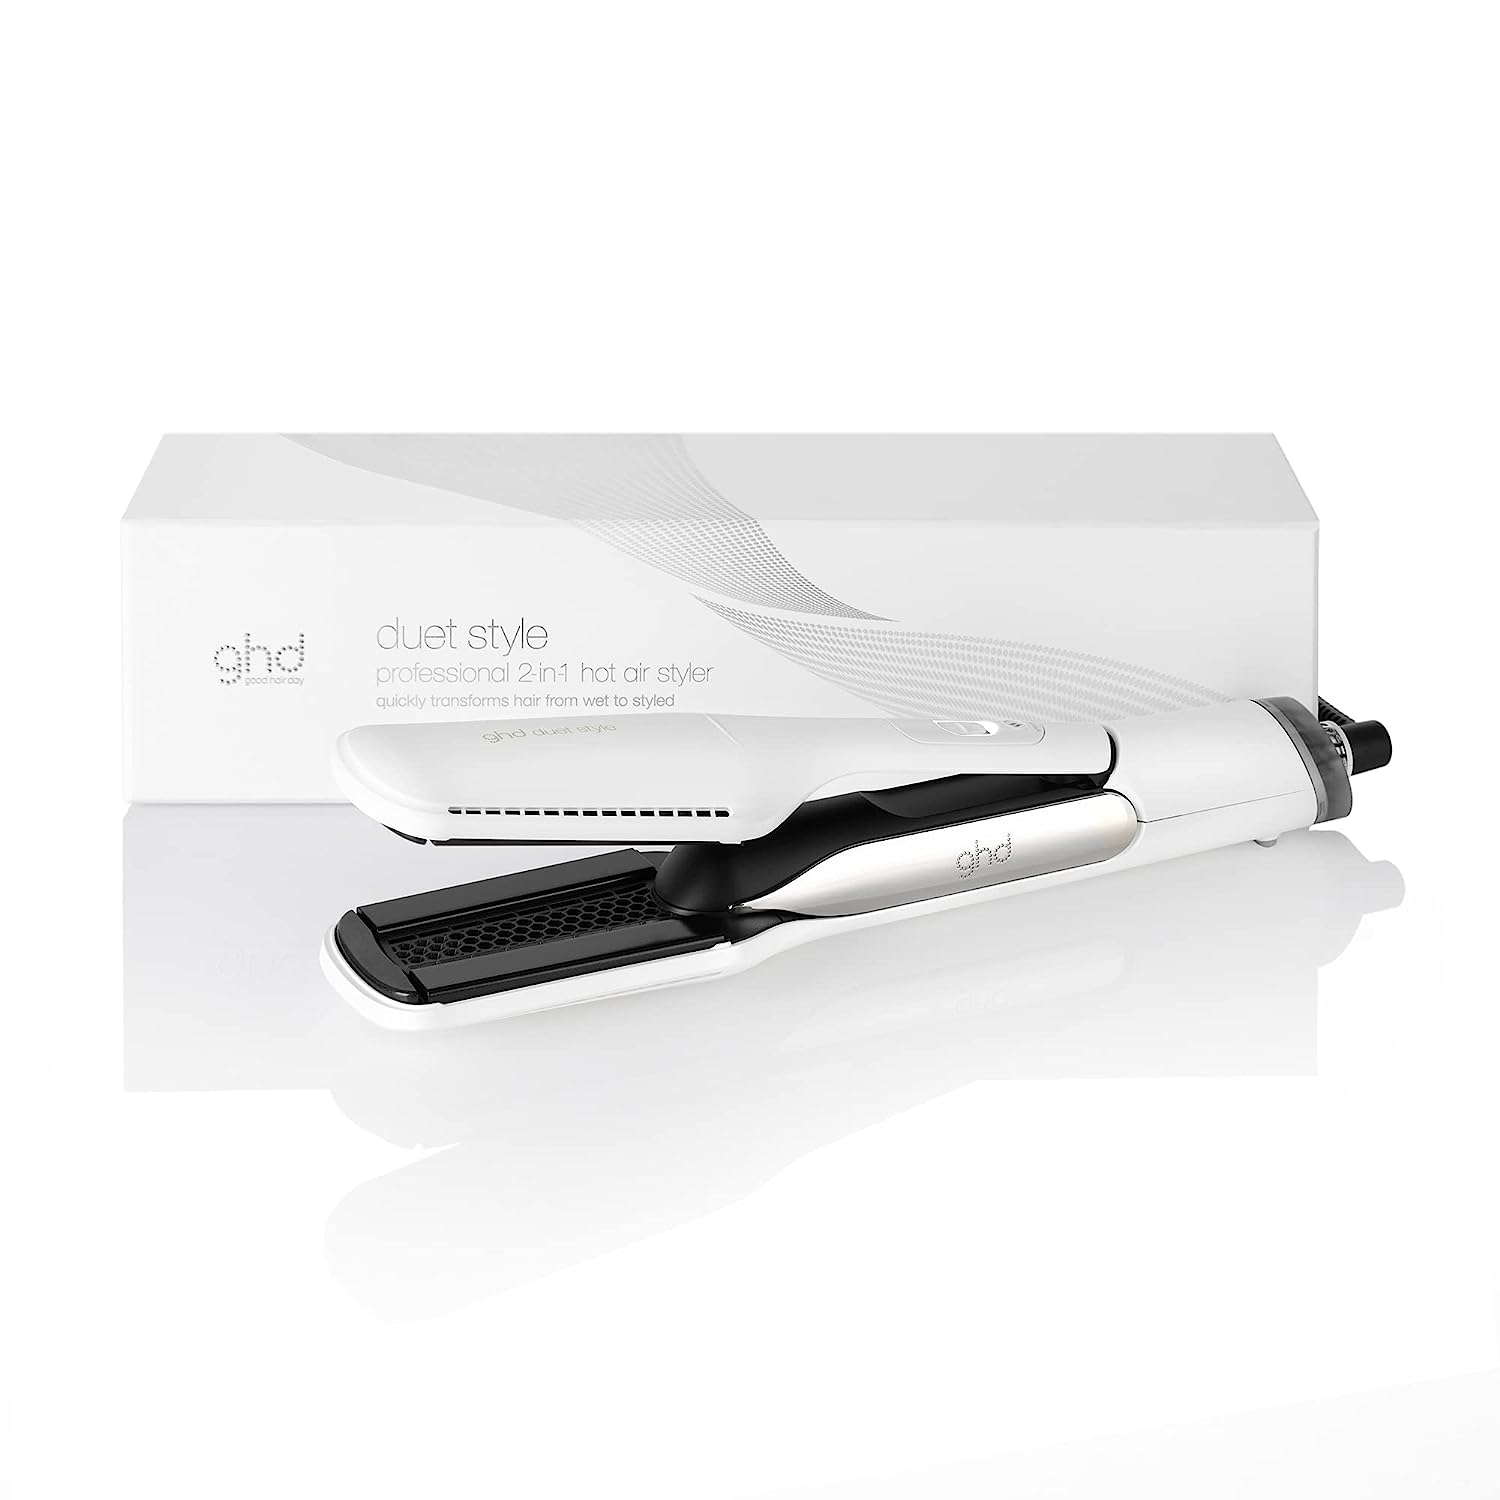 ghd duet hair style | 2-in-1 straightener + hair dryer, hot air styler for the transformation from wet to styled hair